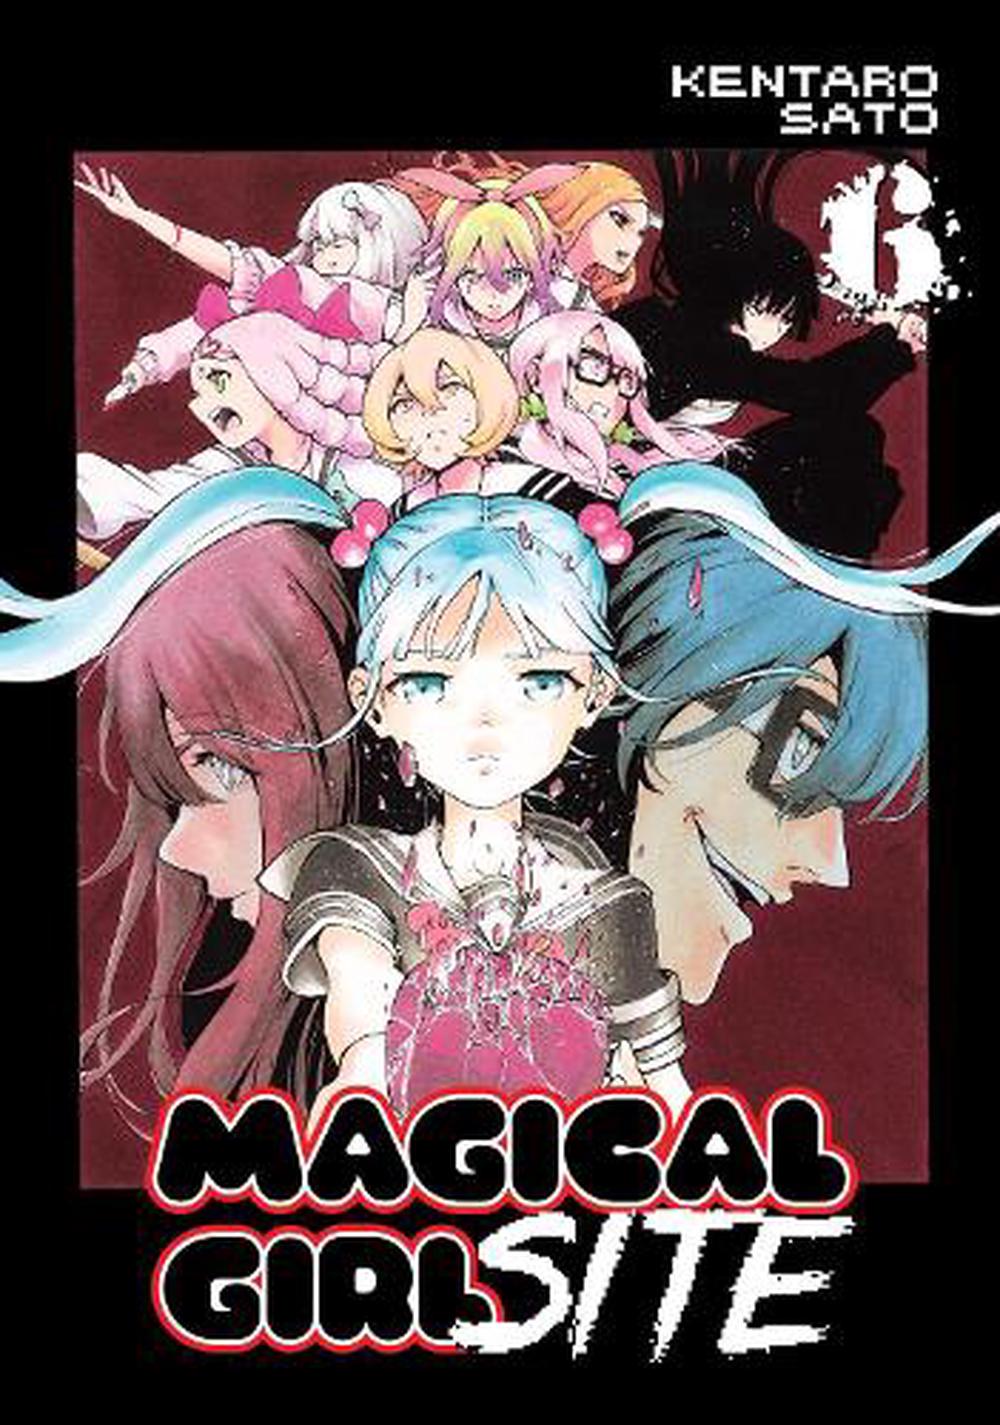 magical girl site raw